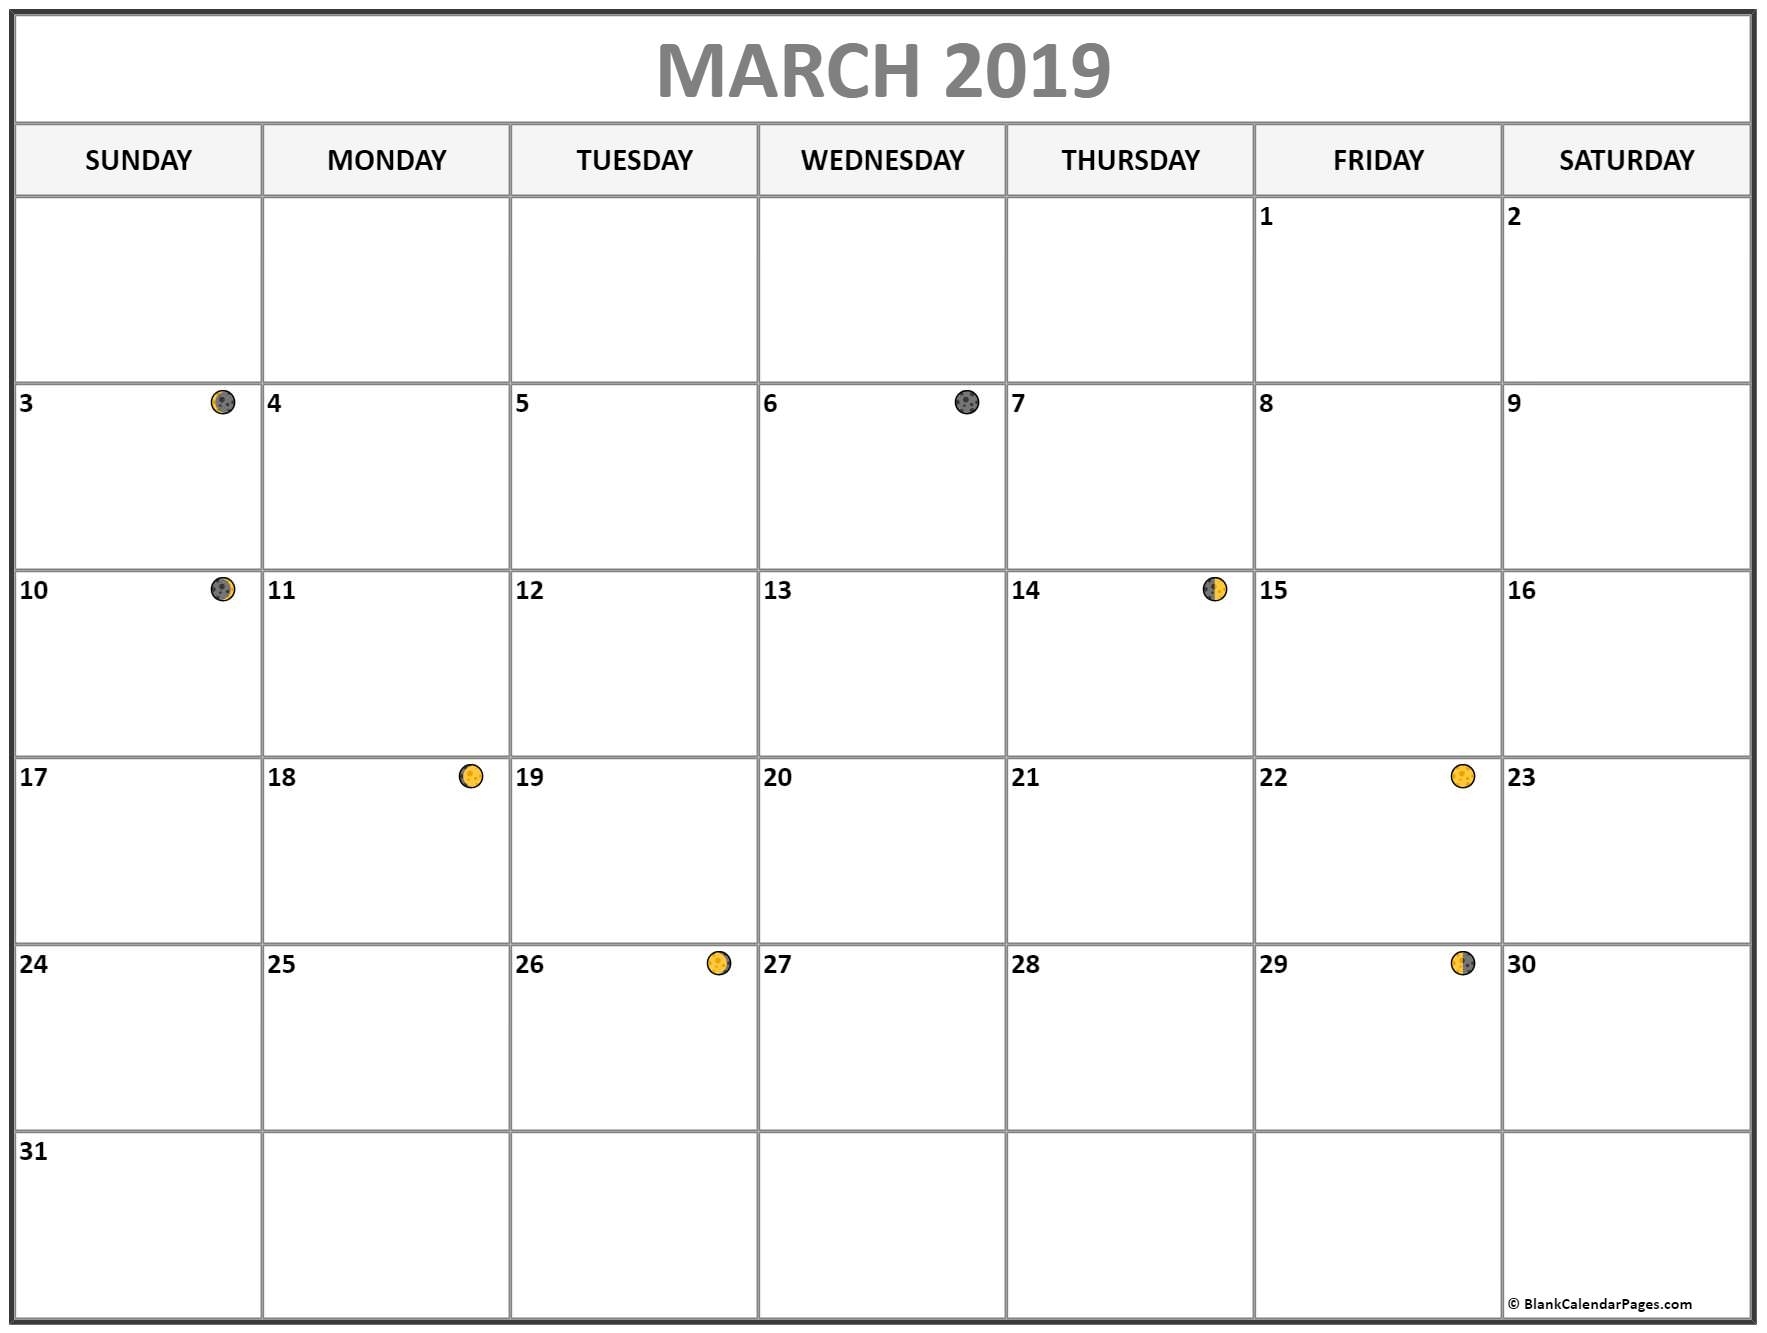 New March Moon Calendar Full Phases For